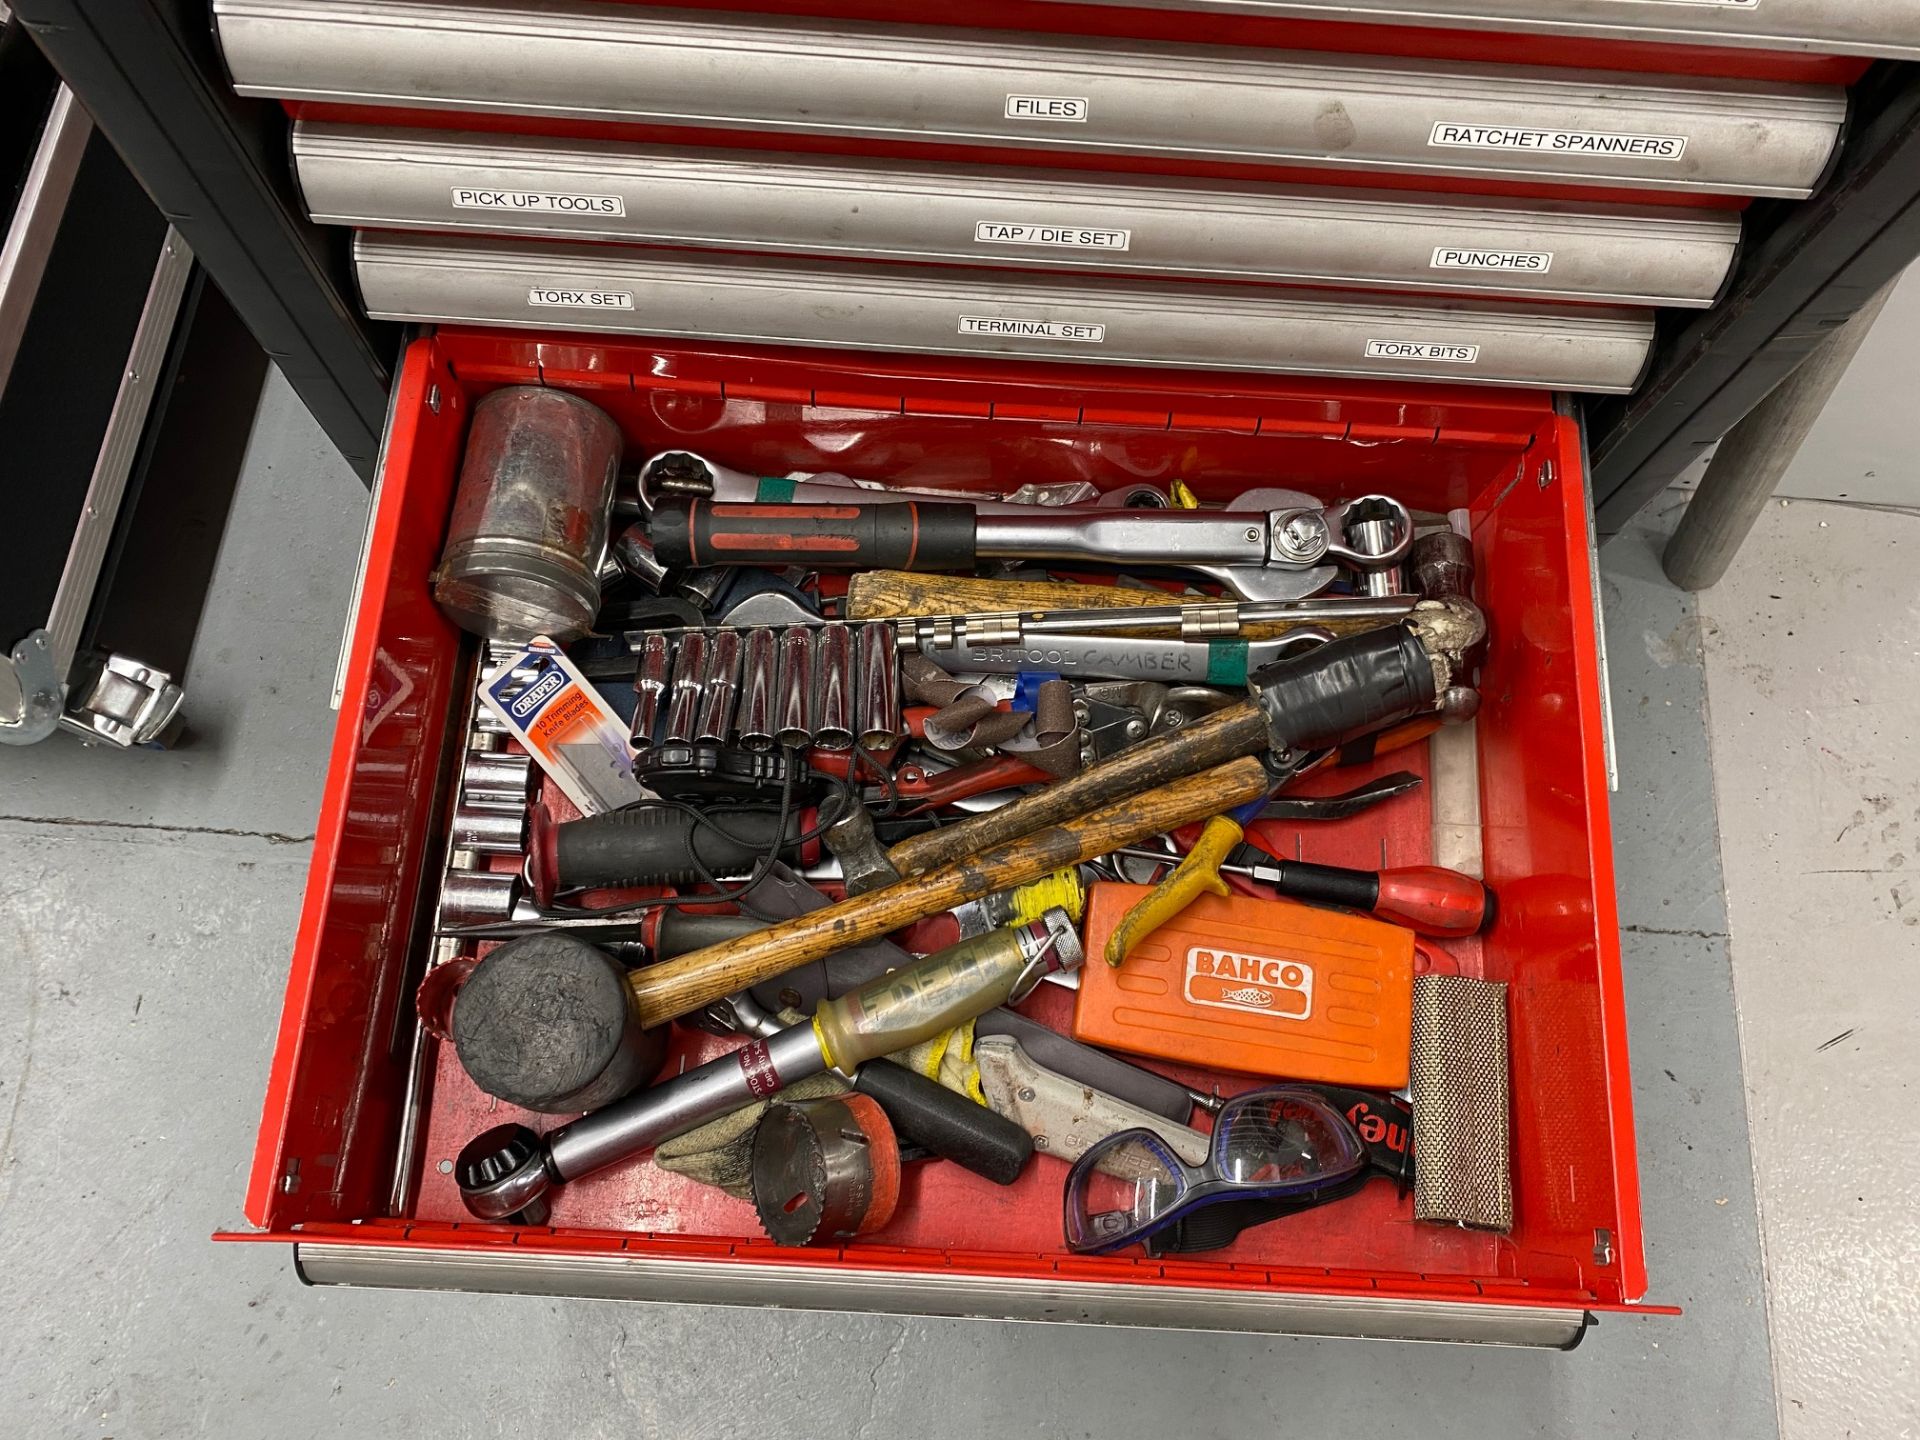 Sealey Premier 8 drawer mobile toolbox including the following tools, metric sockets 10-32mm, 1/ - Bild 8 aus 10